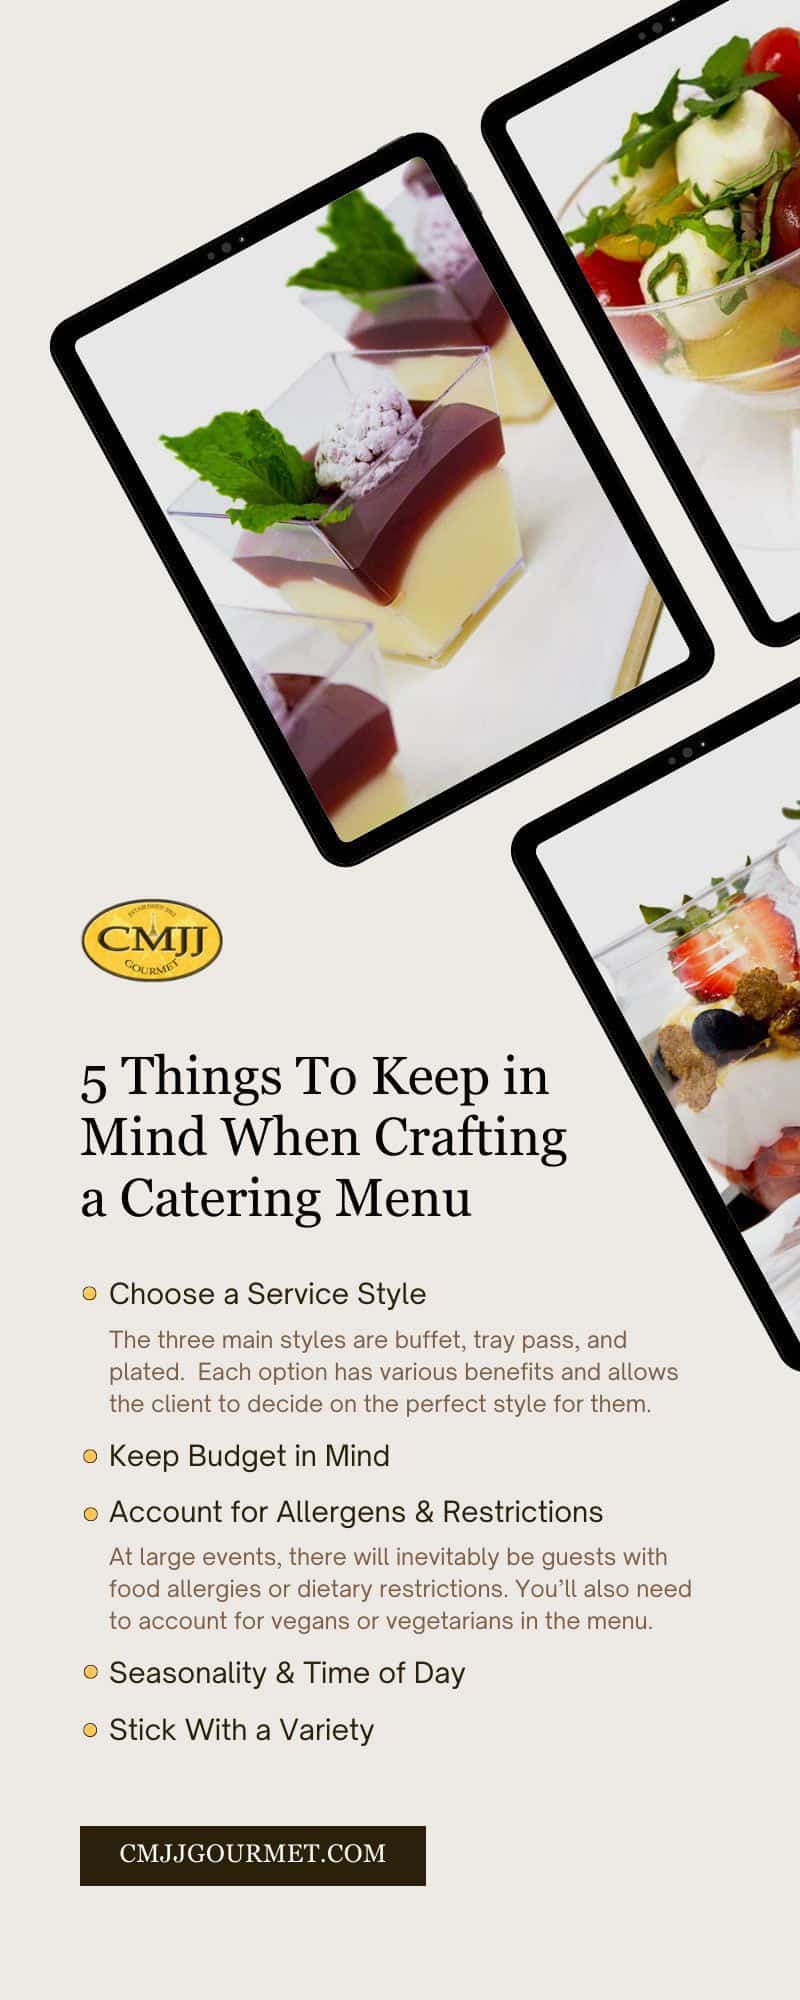 5 Things To Keep in Mind When Crafting a Catering Menu